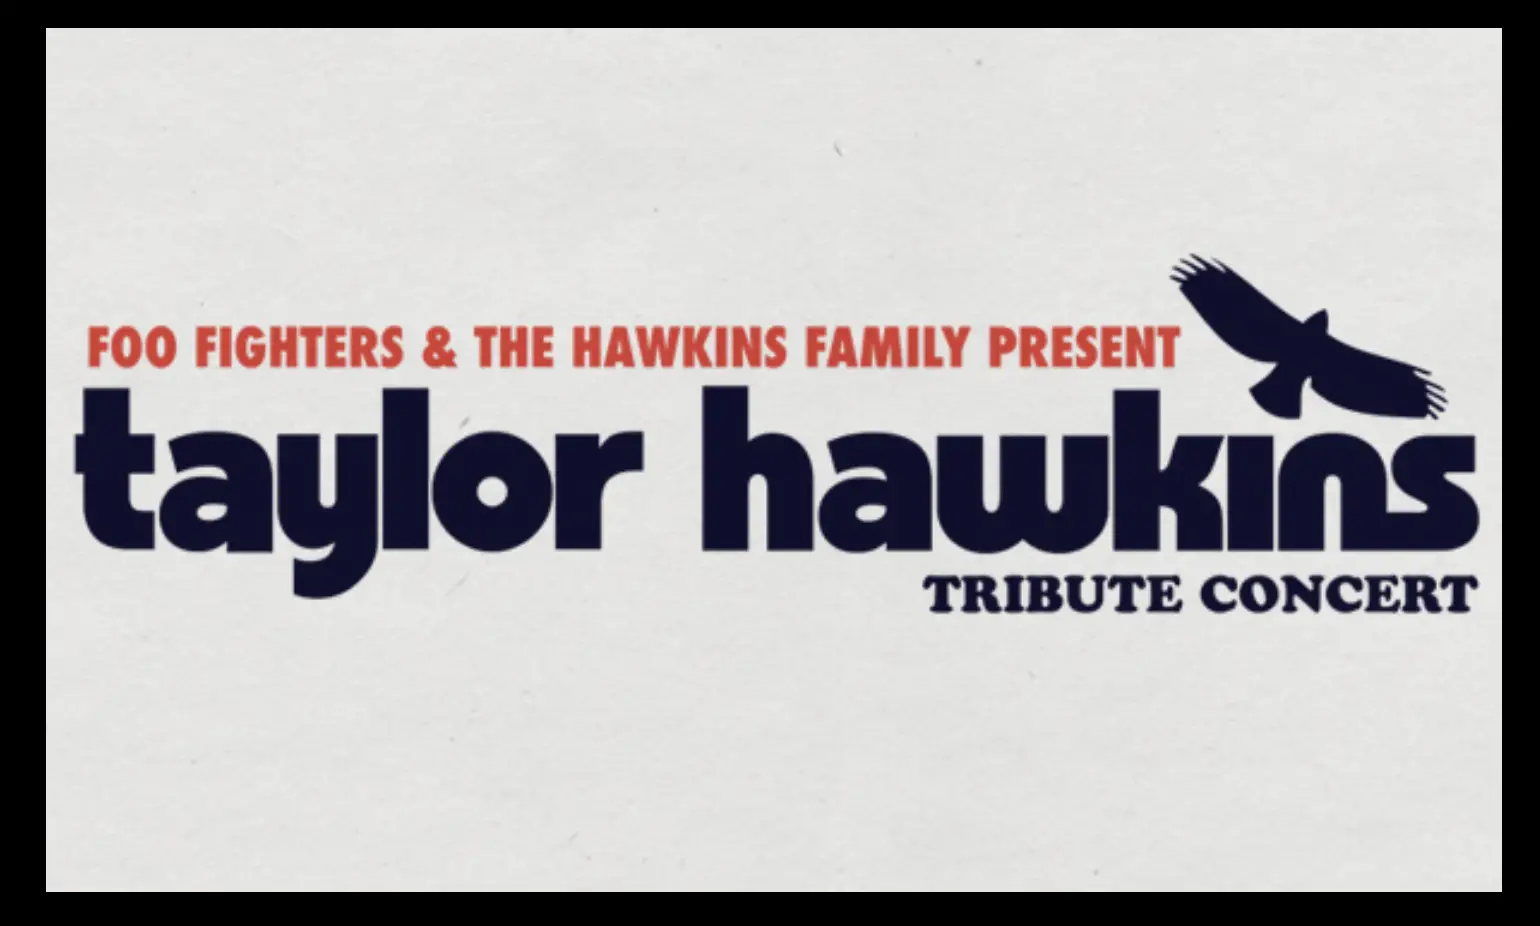 Here were the sets and performance order for the Taylor Hawkins tribute concert at Wembley.